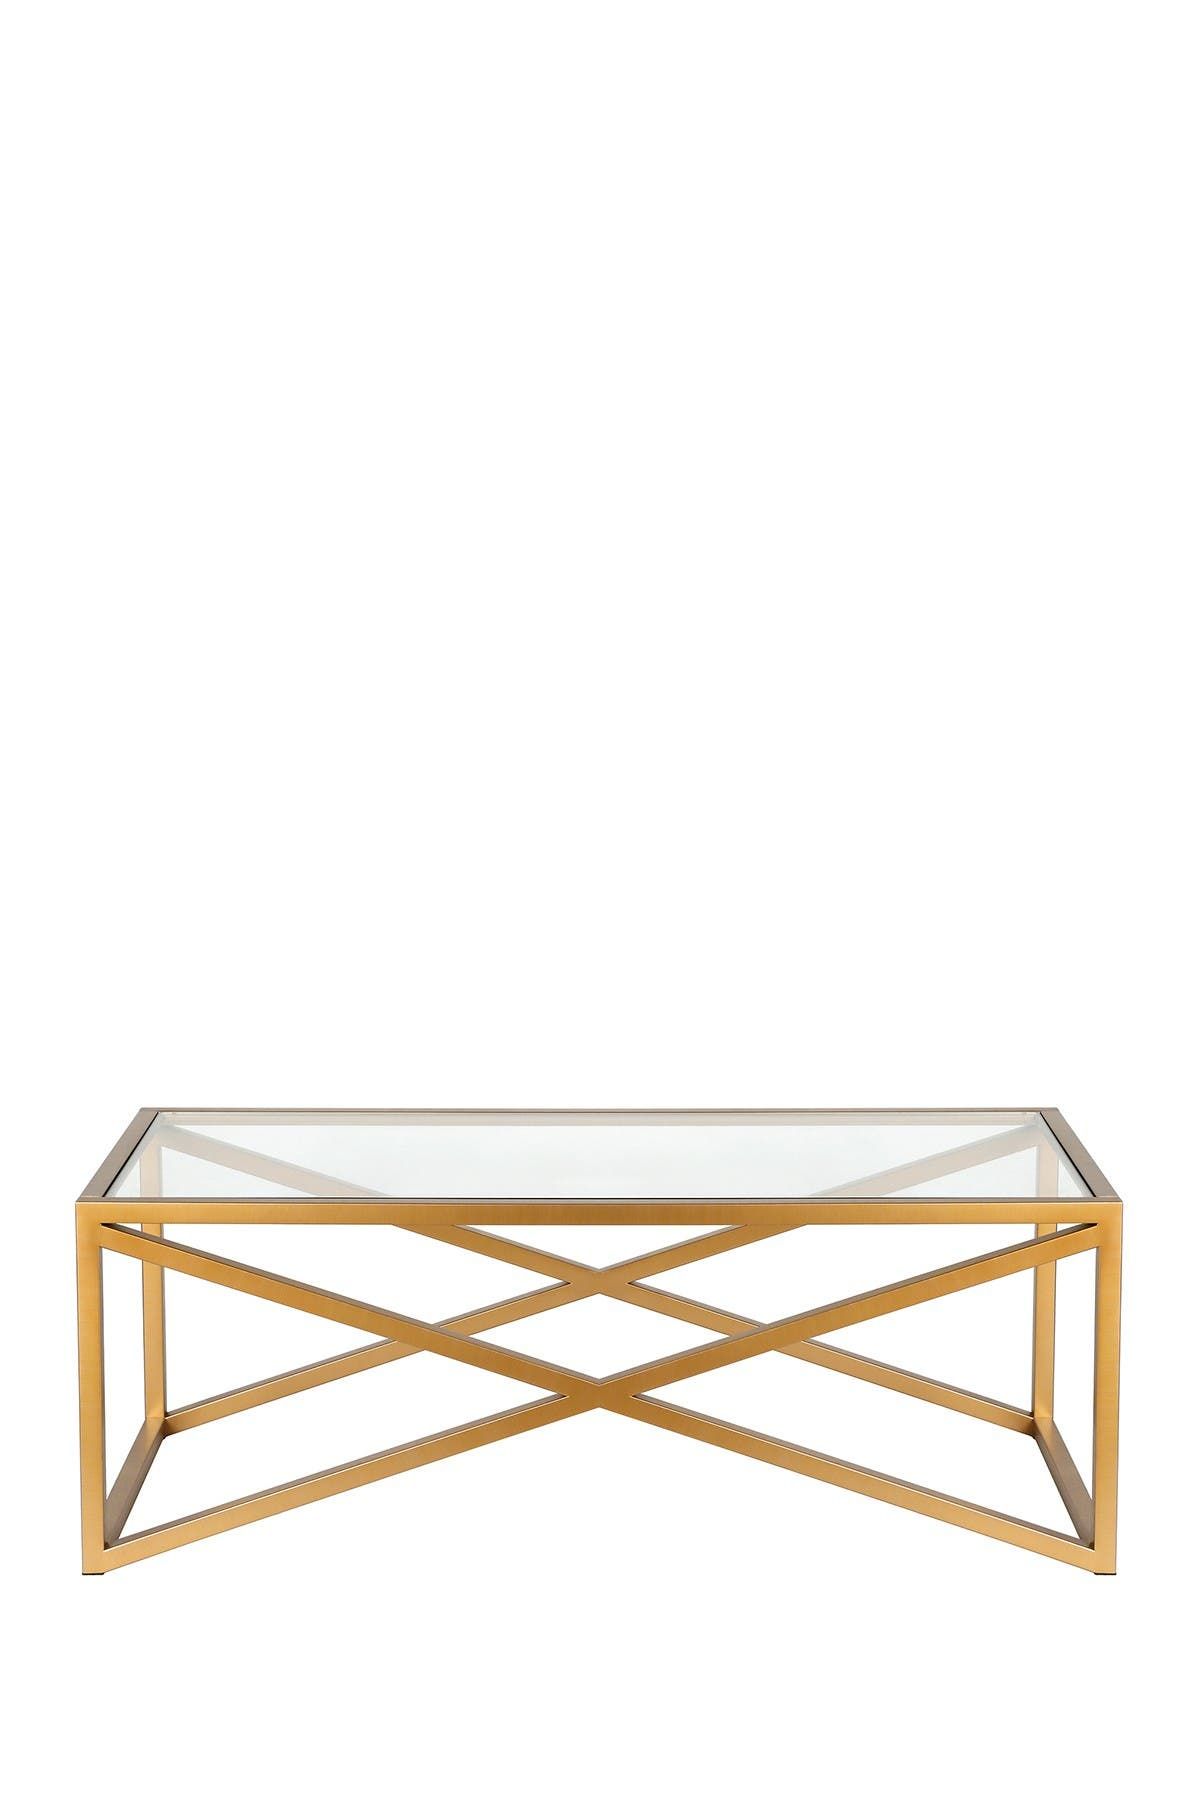 Addison And Lane Calix Brass Finish Coffee Table | Nordstromrack Regarding Addison&amp;lane Calix Square Tables (Gallery 18 of 20)